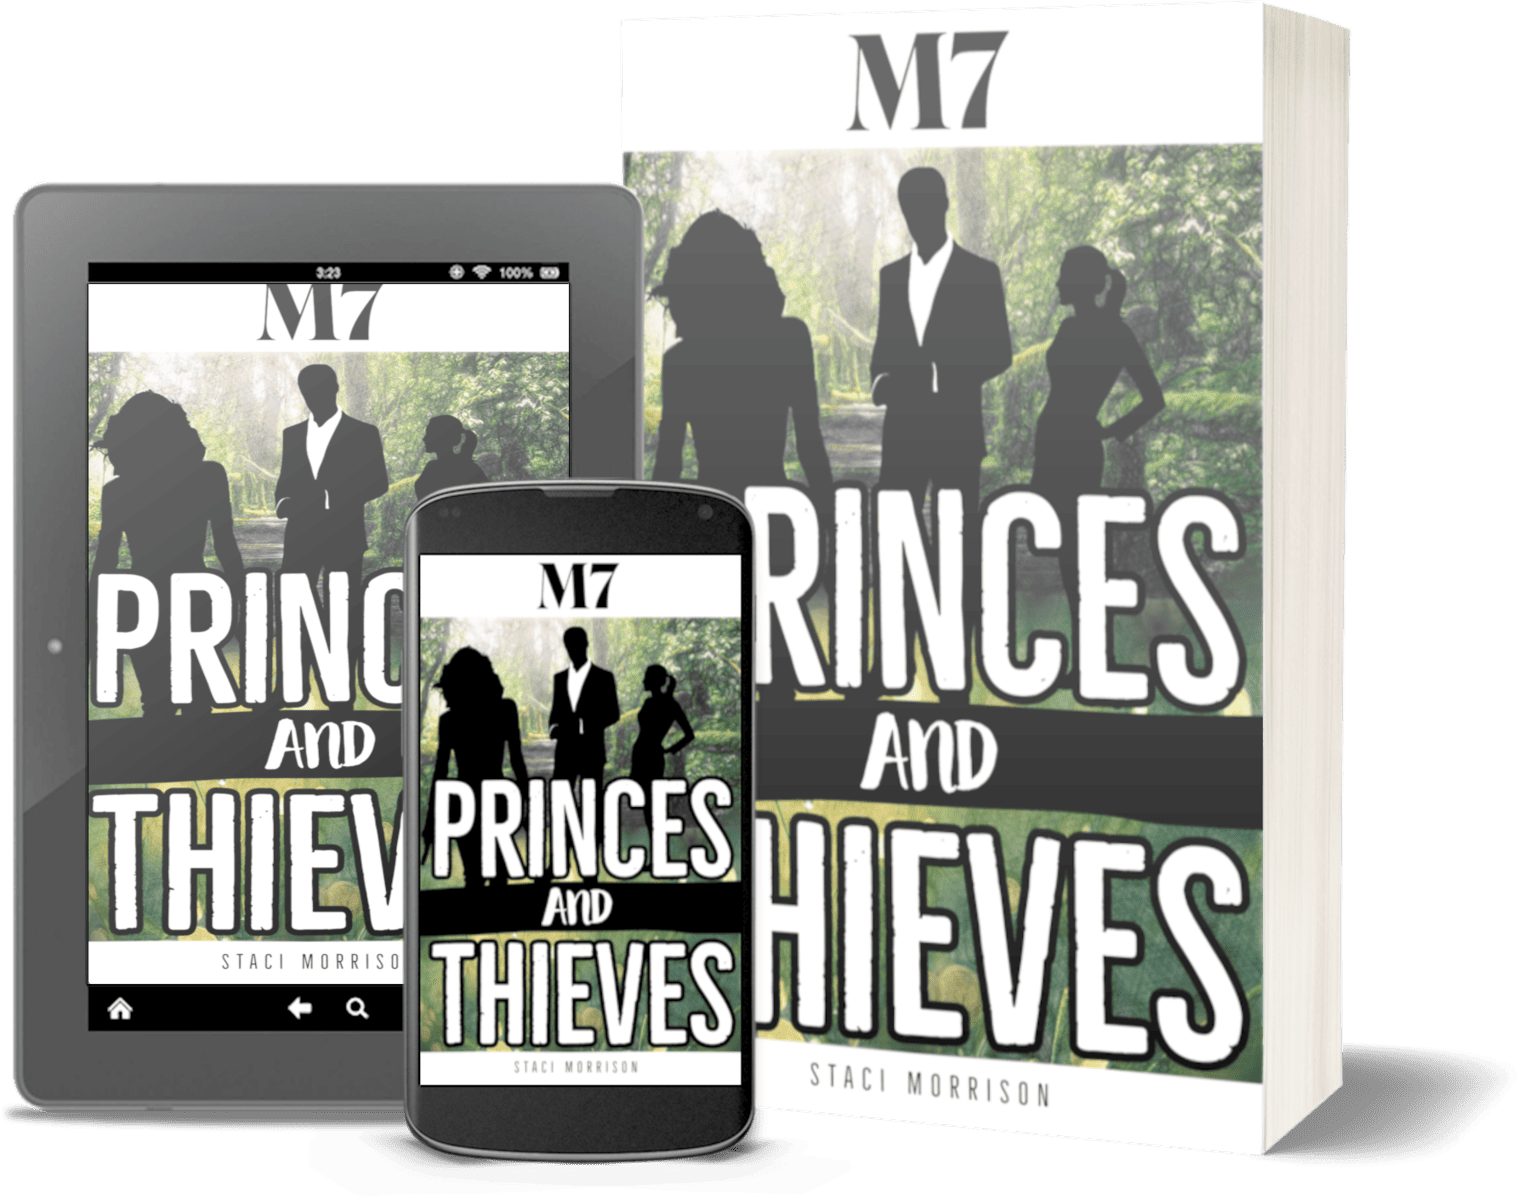 M7 princes and thieves, millennium series, staci morrison, epic fiction, christian fiction, green and black book covers, alanthia publishing, m7-princes and thieves